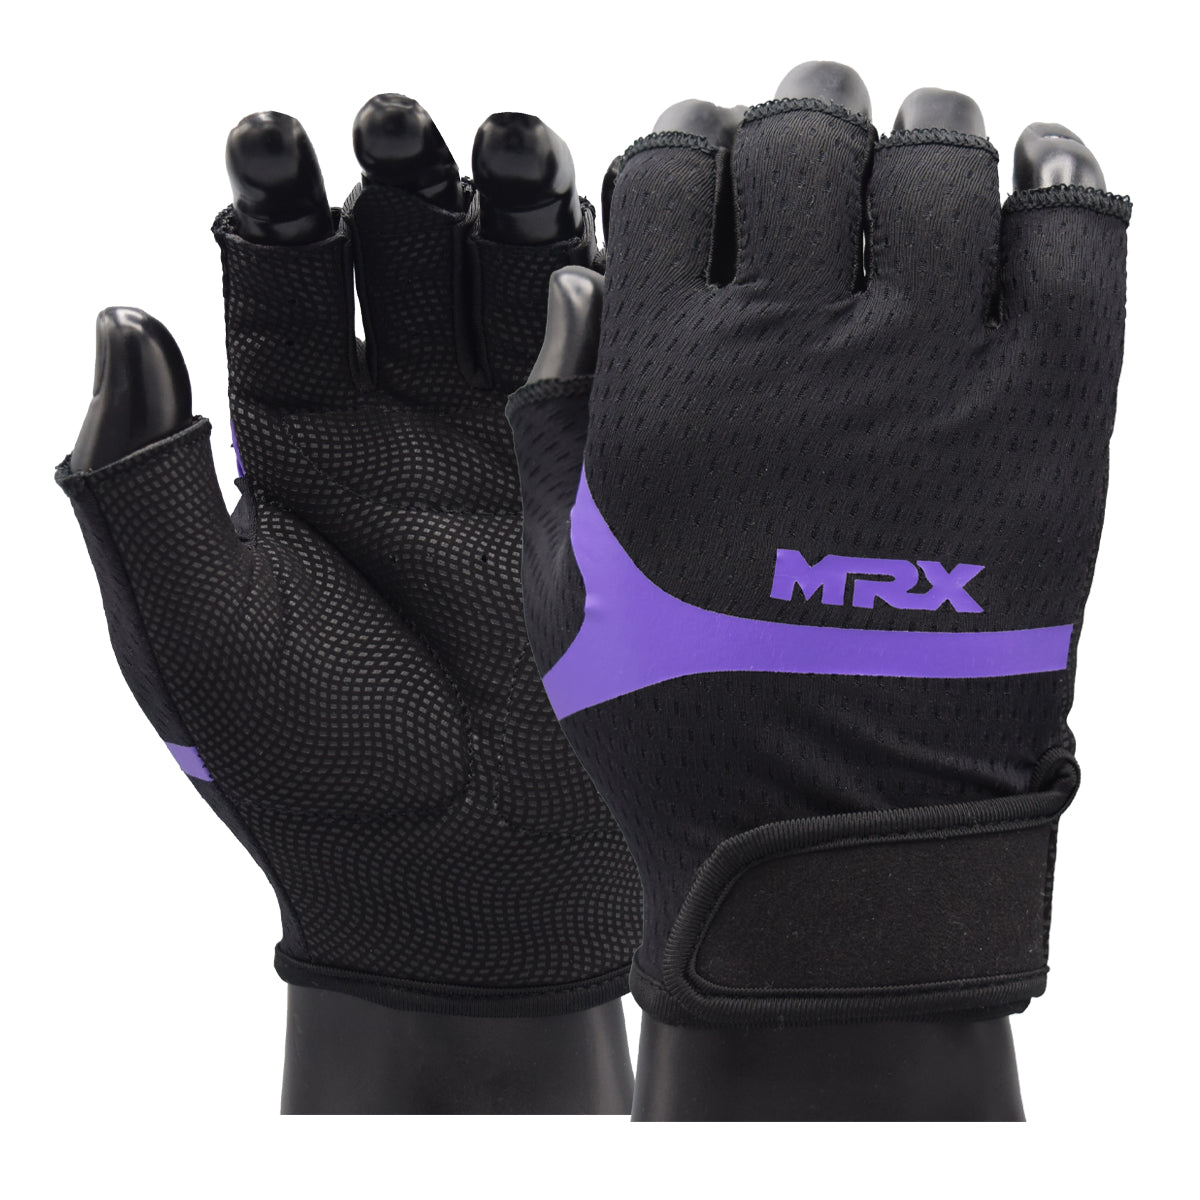 MRX Weight Lifting Gloves for Women Padded Palm Gym Workout Cycling